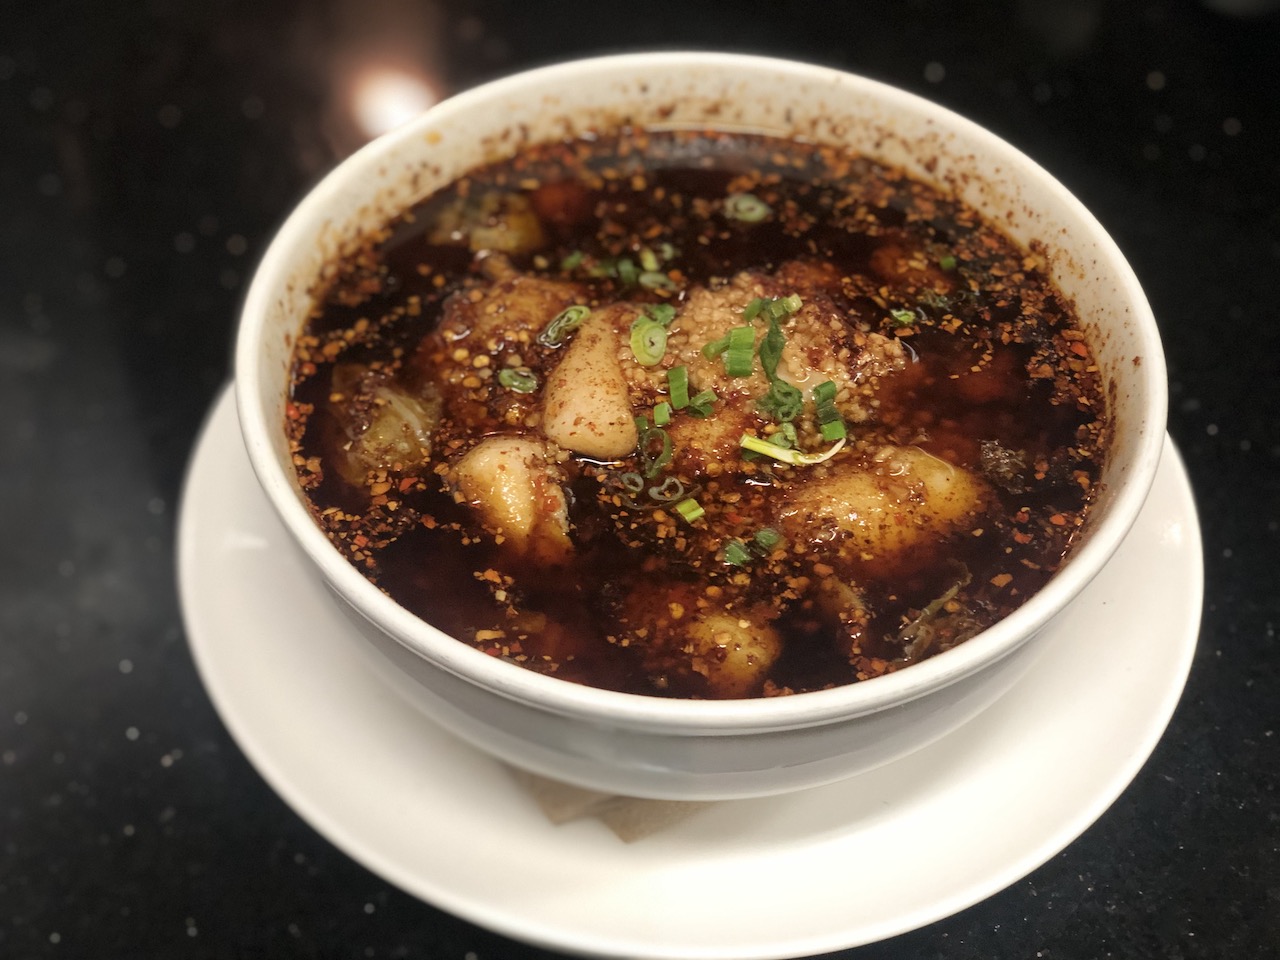 Boiled Fish Fillet with Hot Sauce 水煮鱼--Extra Spicy